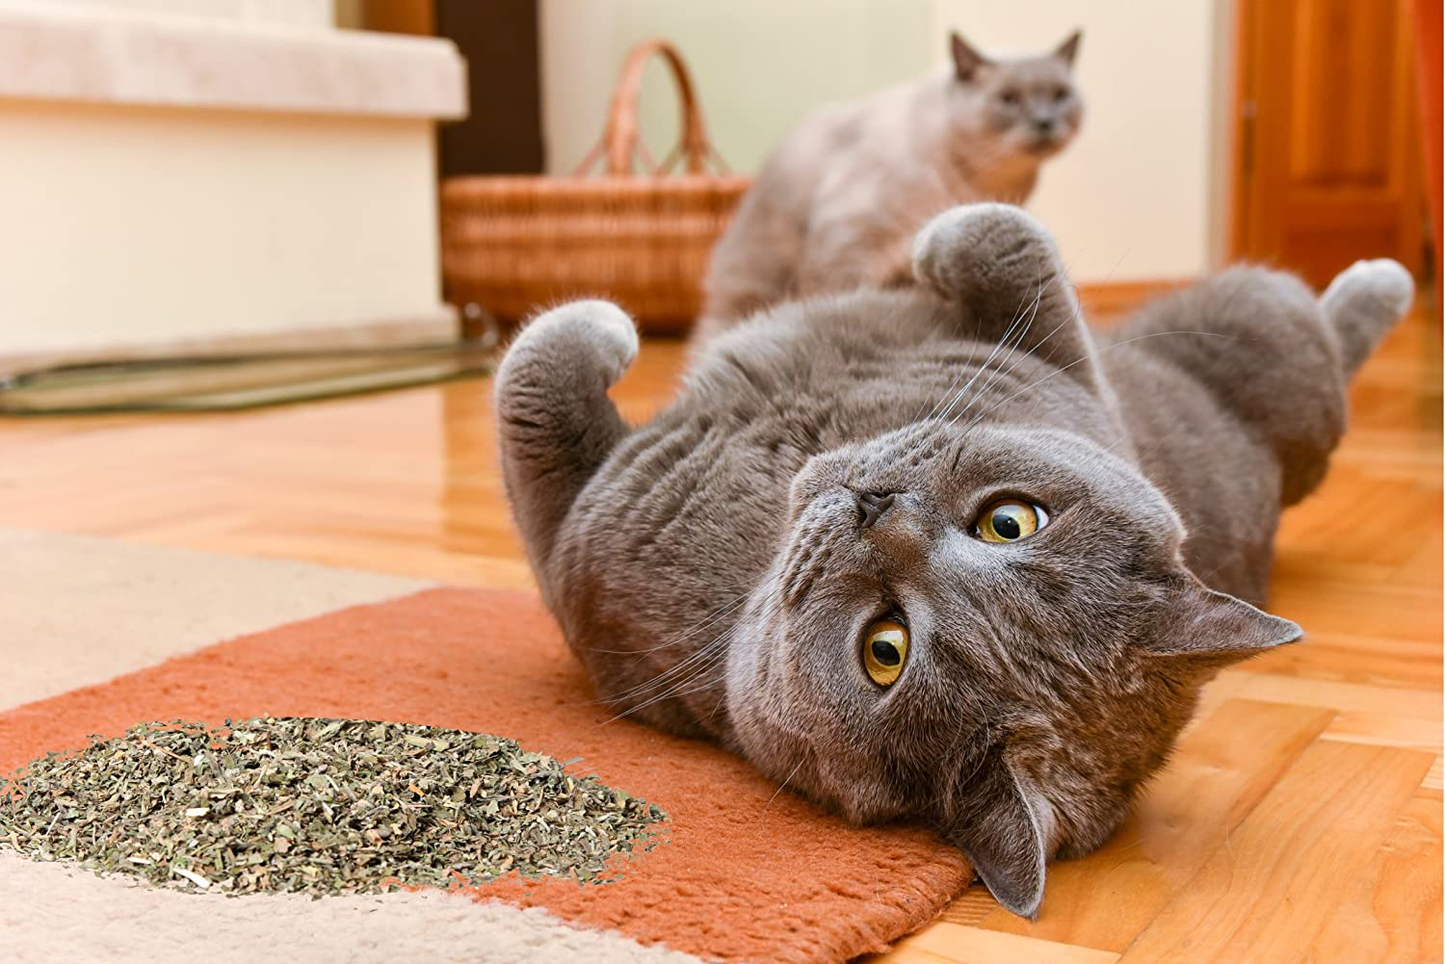 Cat Crack Catnip, Premium Blend Safe for Cats, Infused with Maximum Potency Your Kitty Is Sure to Go Crazy For Animals & Pet Supplies > Pet Supplies > Dog Supplies > Dog Treadmills Cat Addictions, LLC   